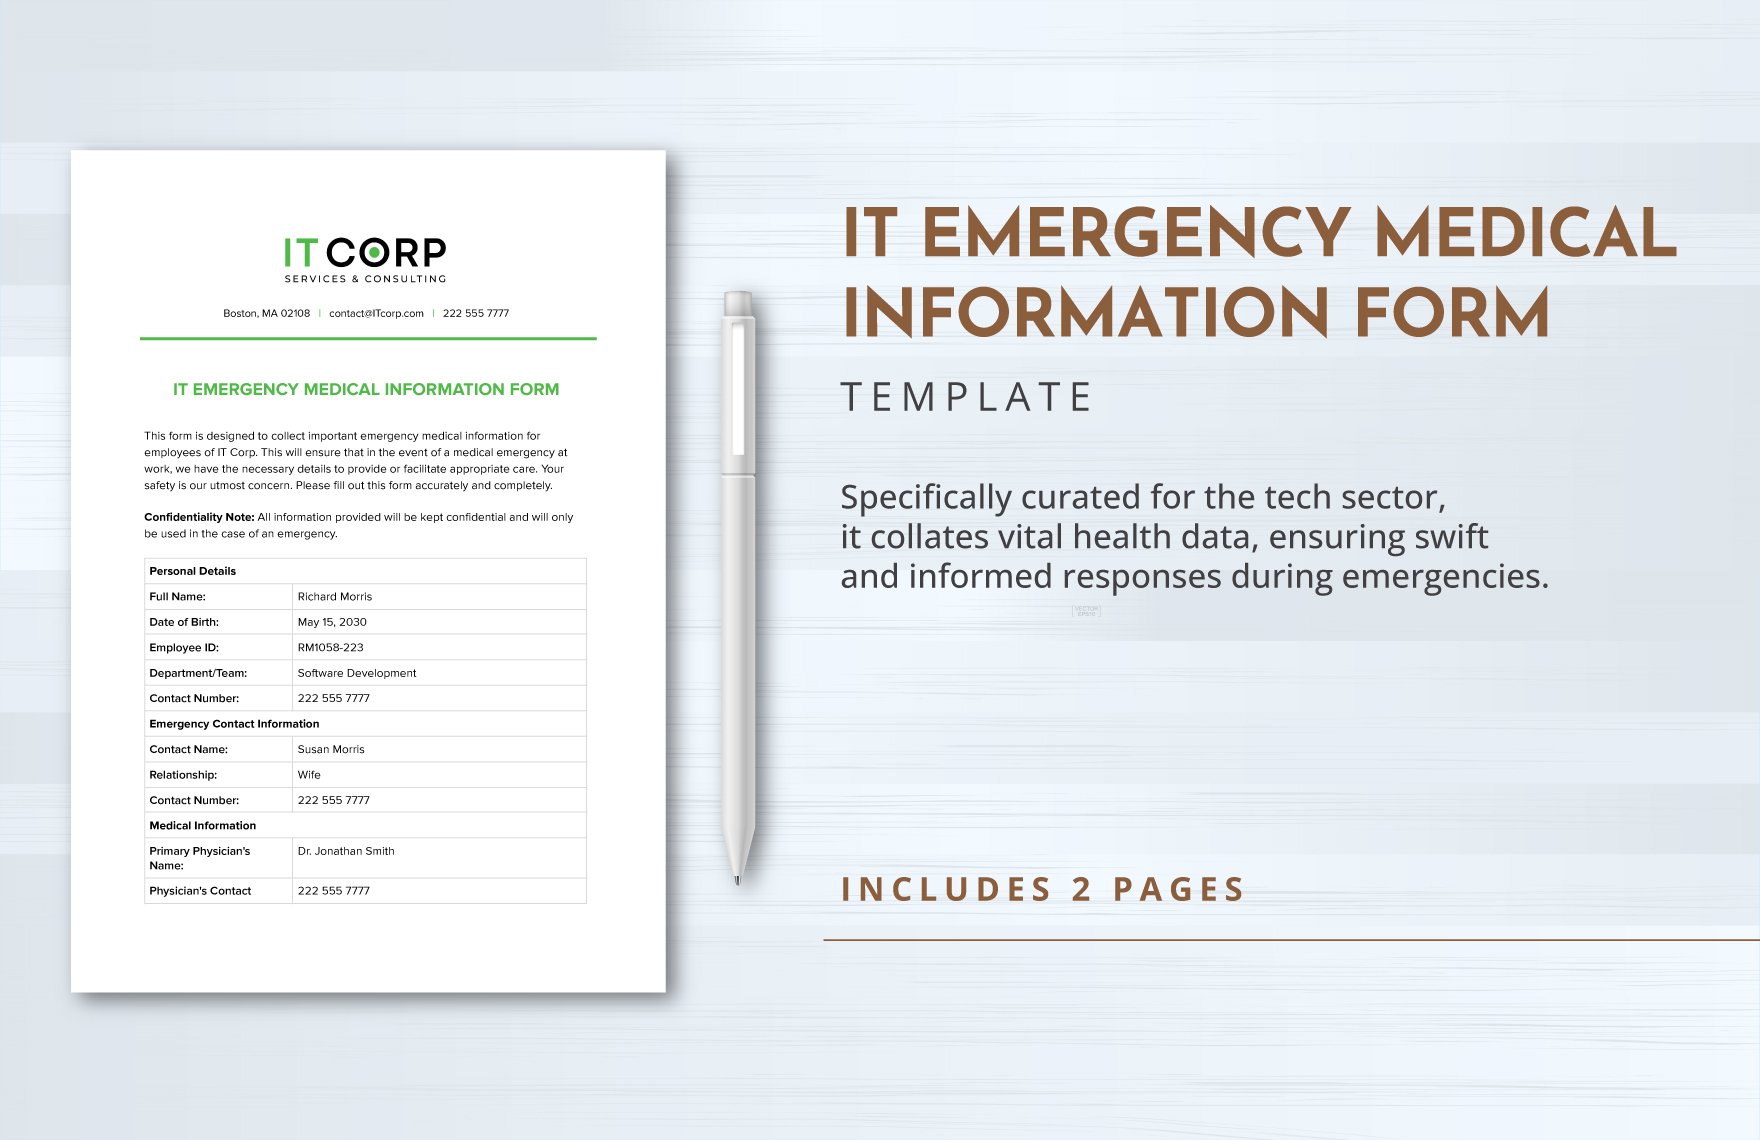 IT Emergency Medical Information Form Template in Word, Google Docs, PDF